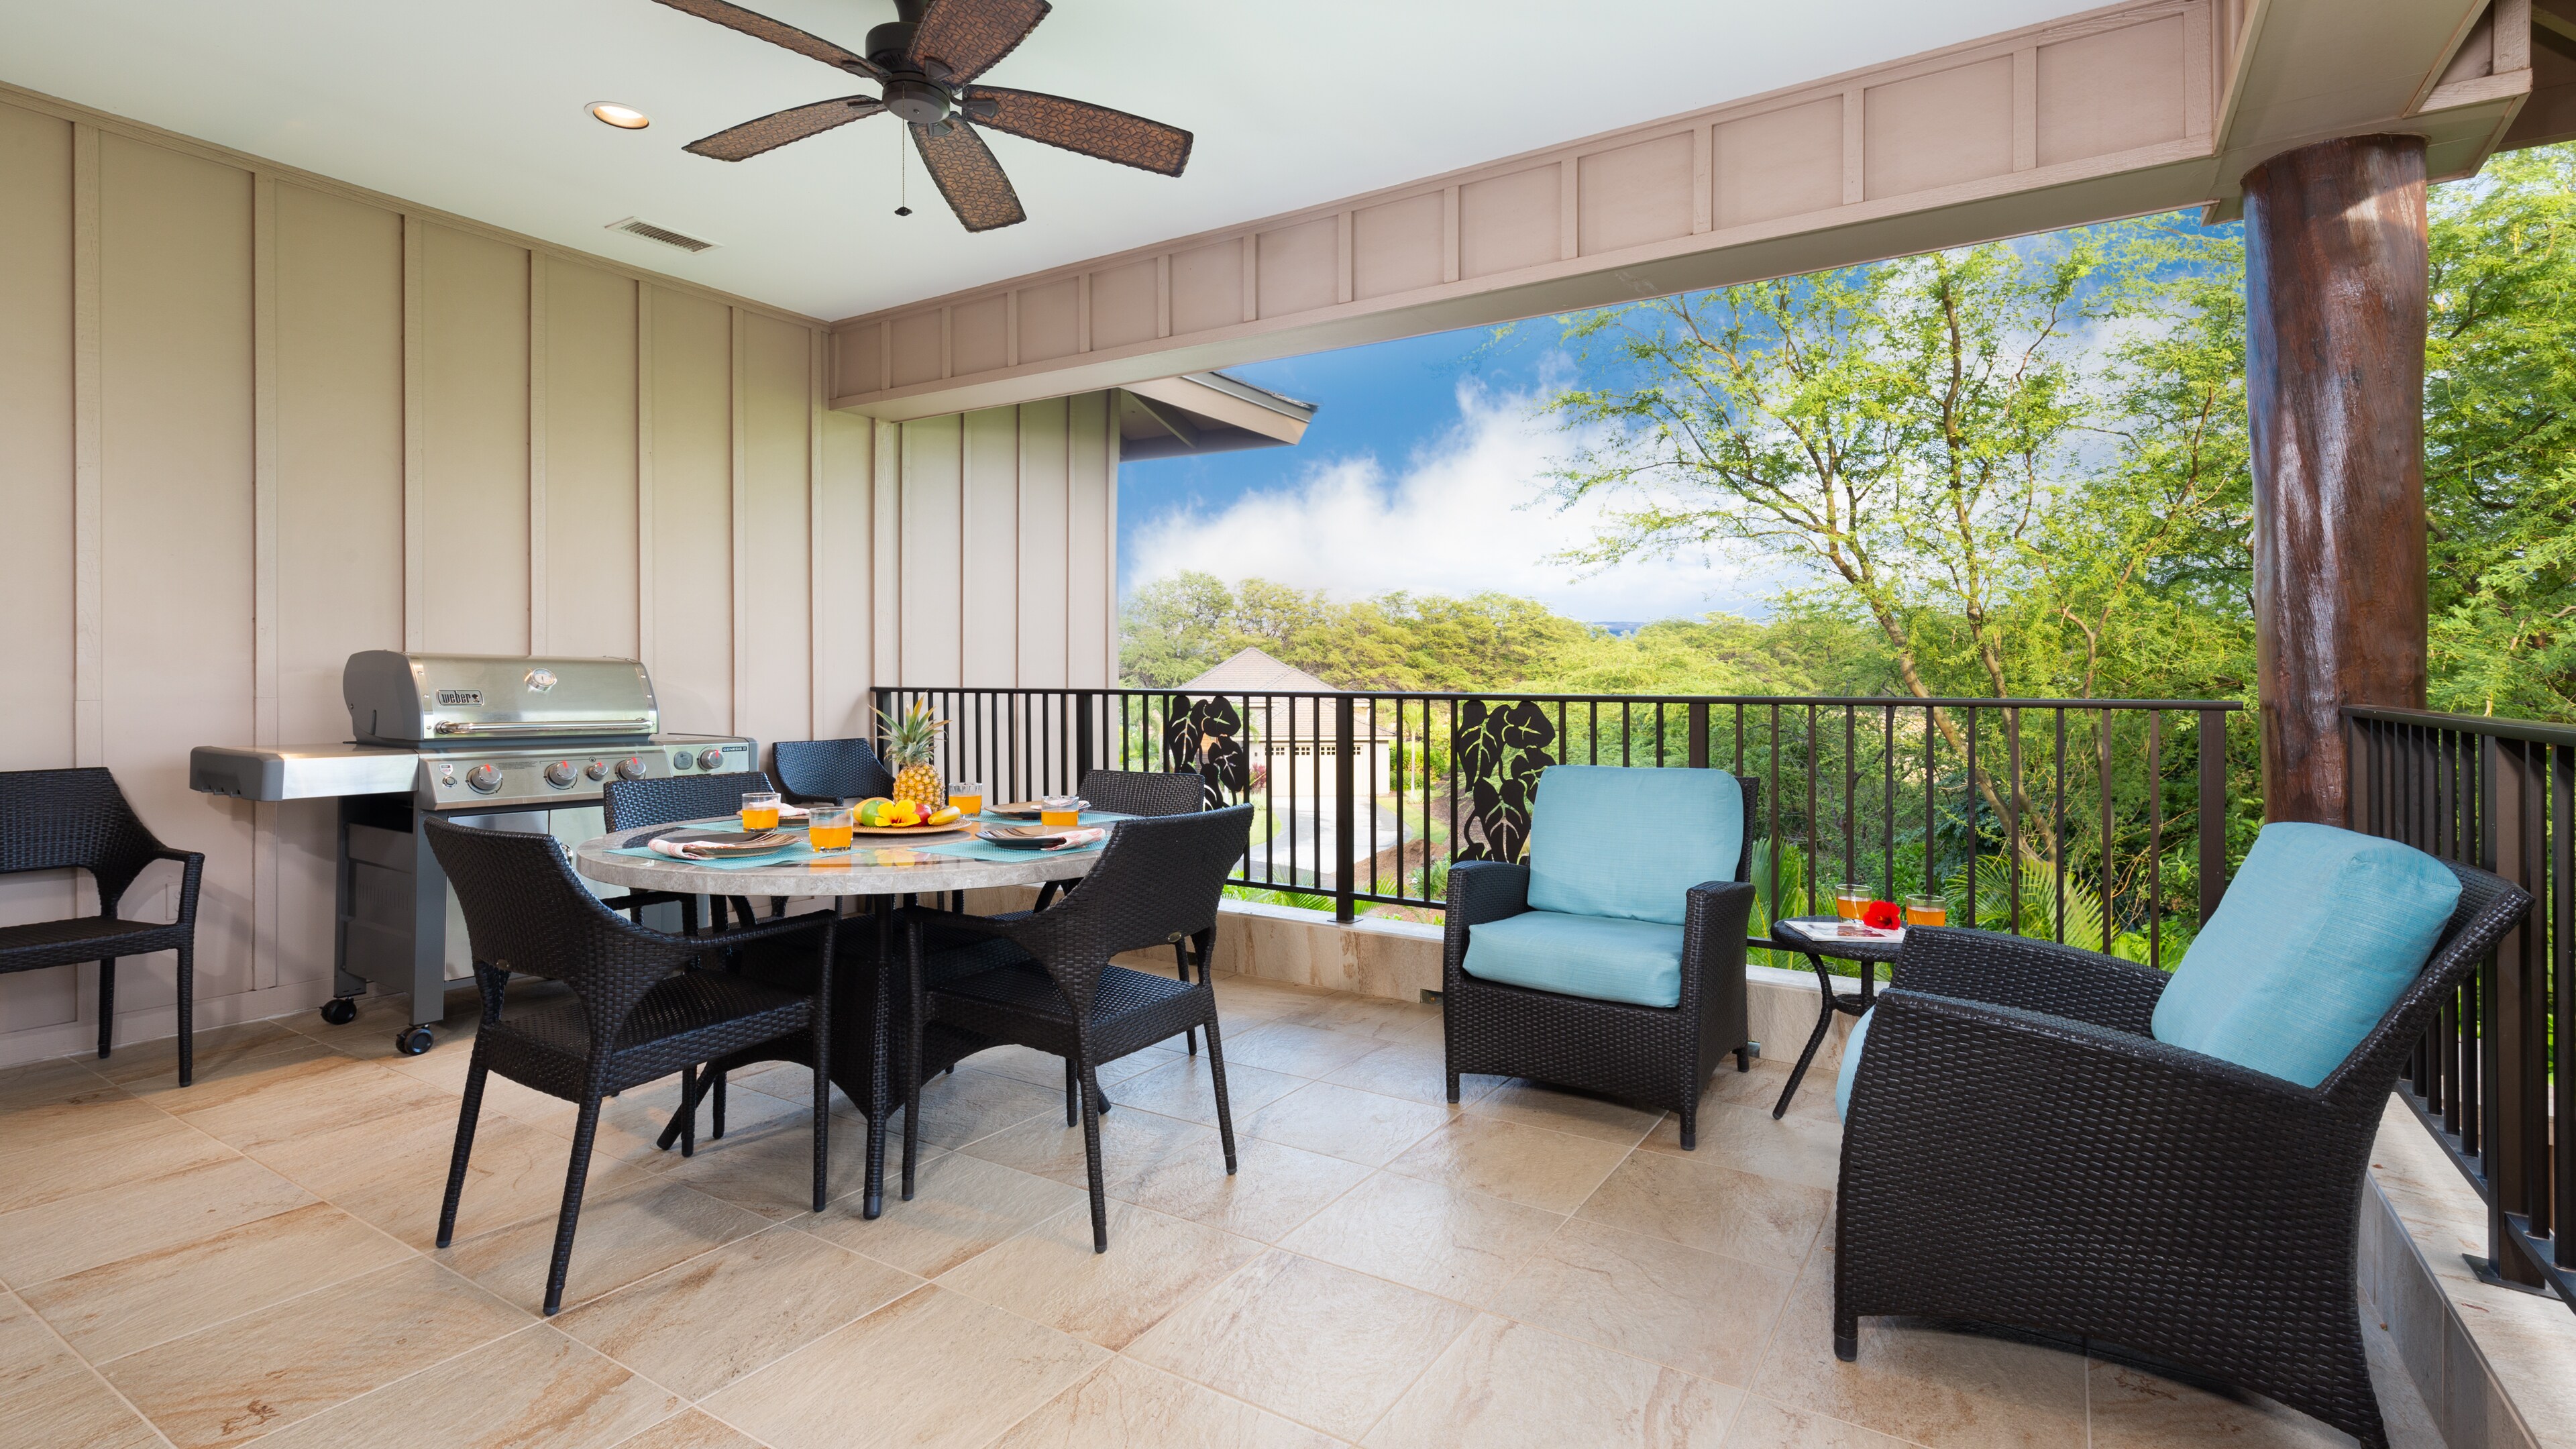 Outdoor lanai with dining table and private BBQ